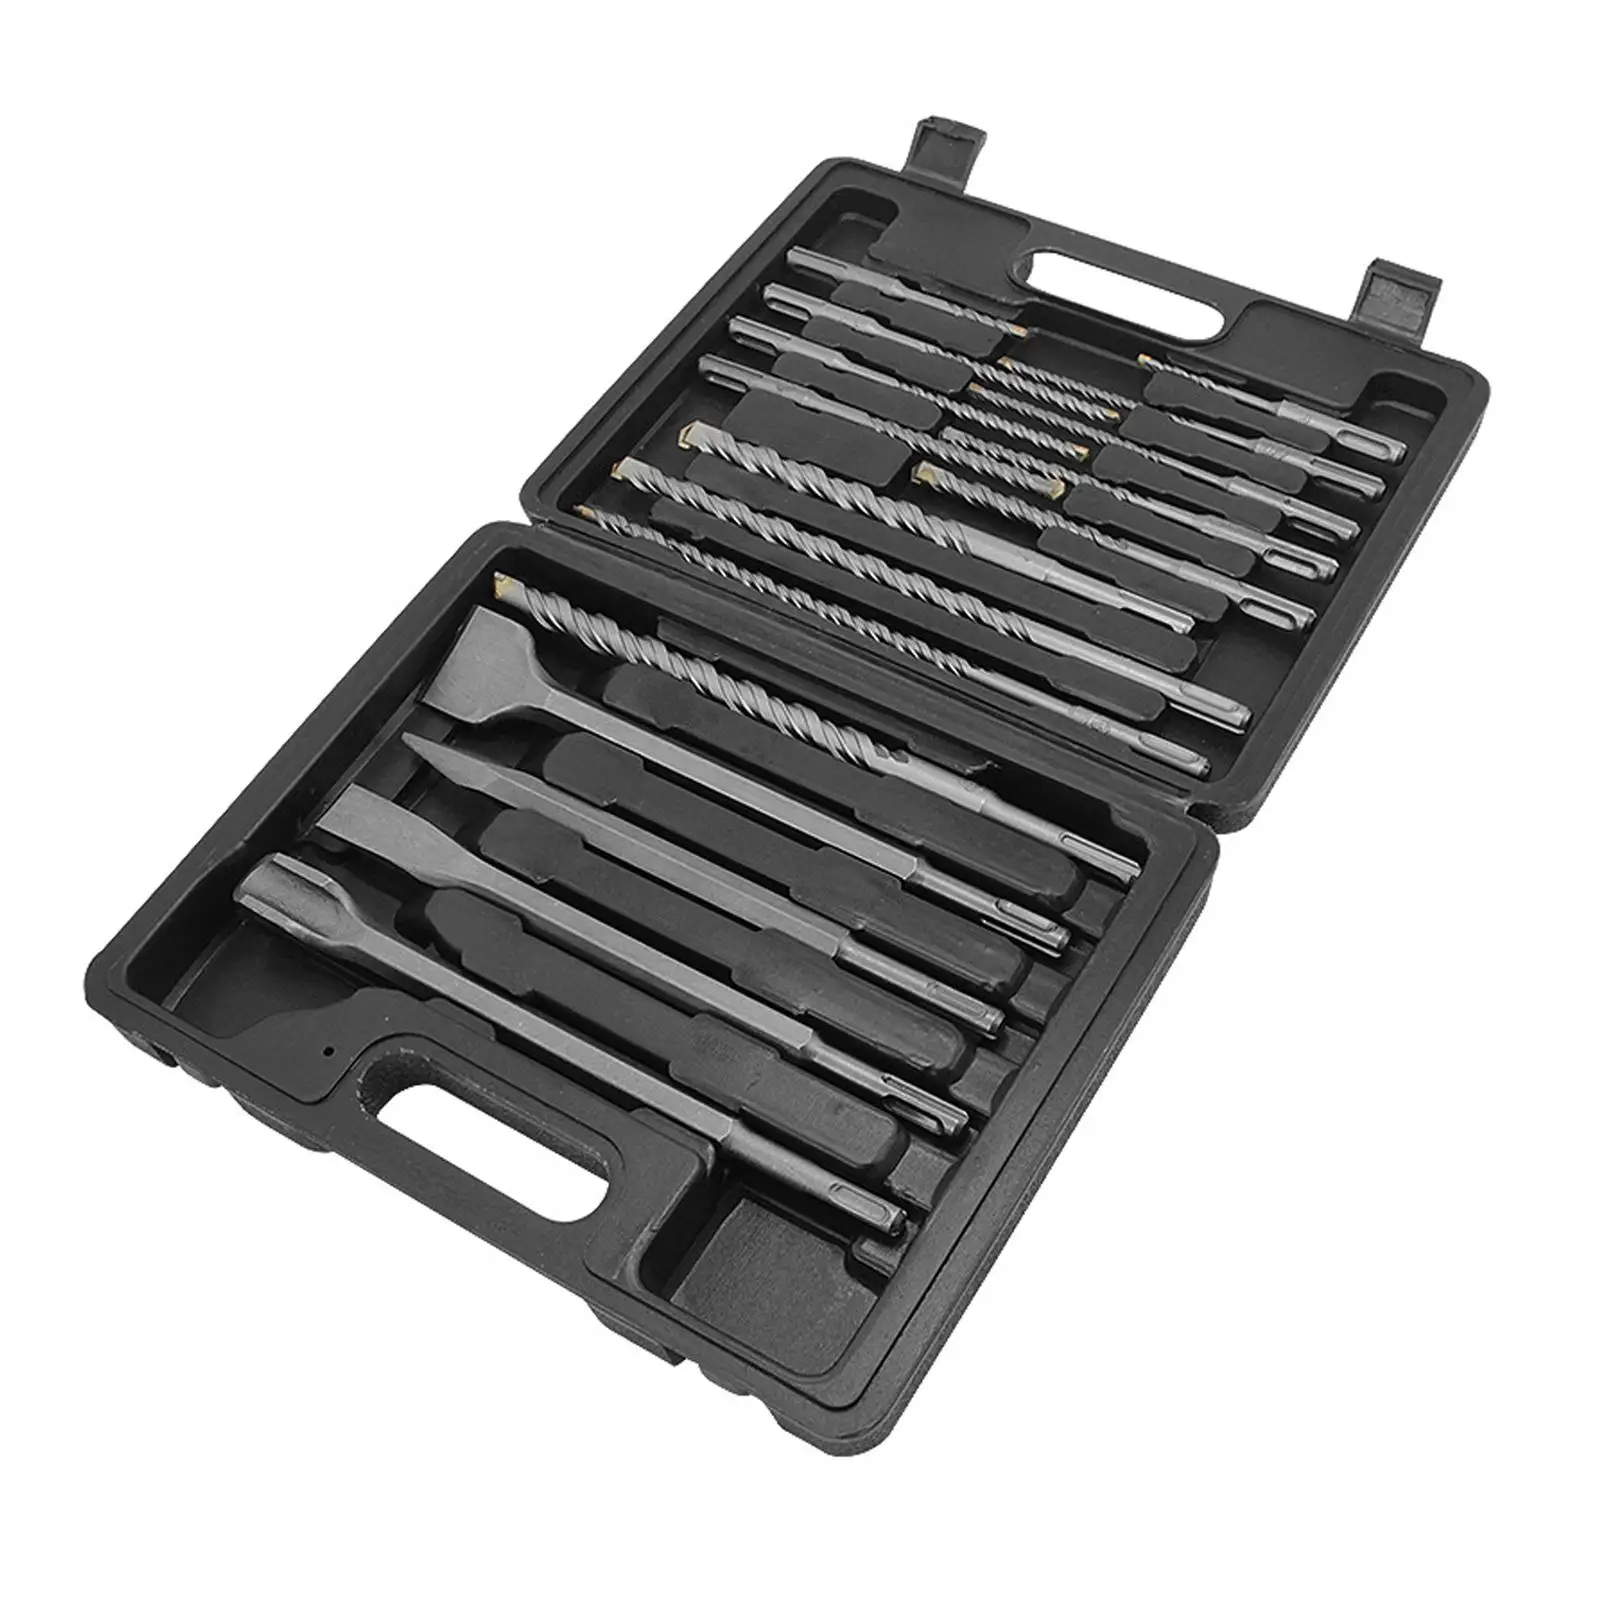 17x Multifunctional Masonry Drill Bit Set Hole Opener Round Shank Drill Hammer Drill Bit for Glass Marble Cement Wall Ceramic